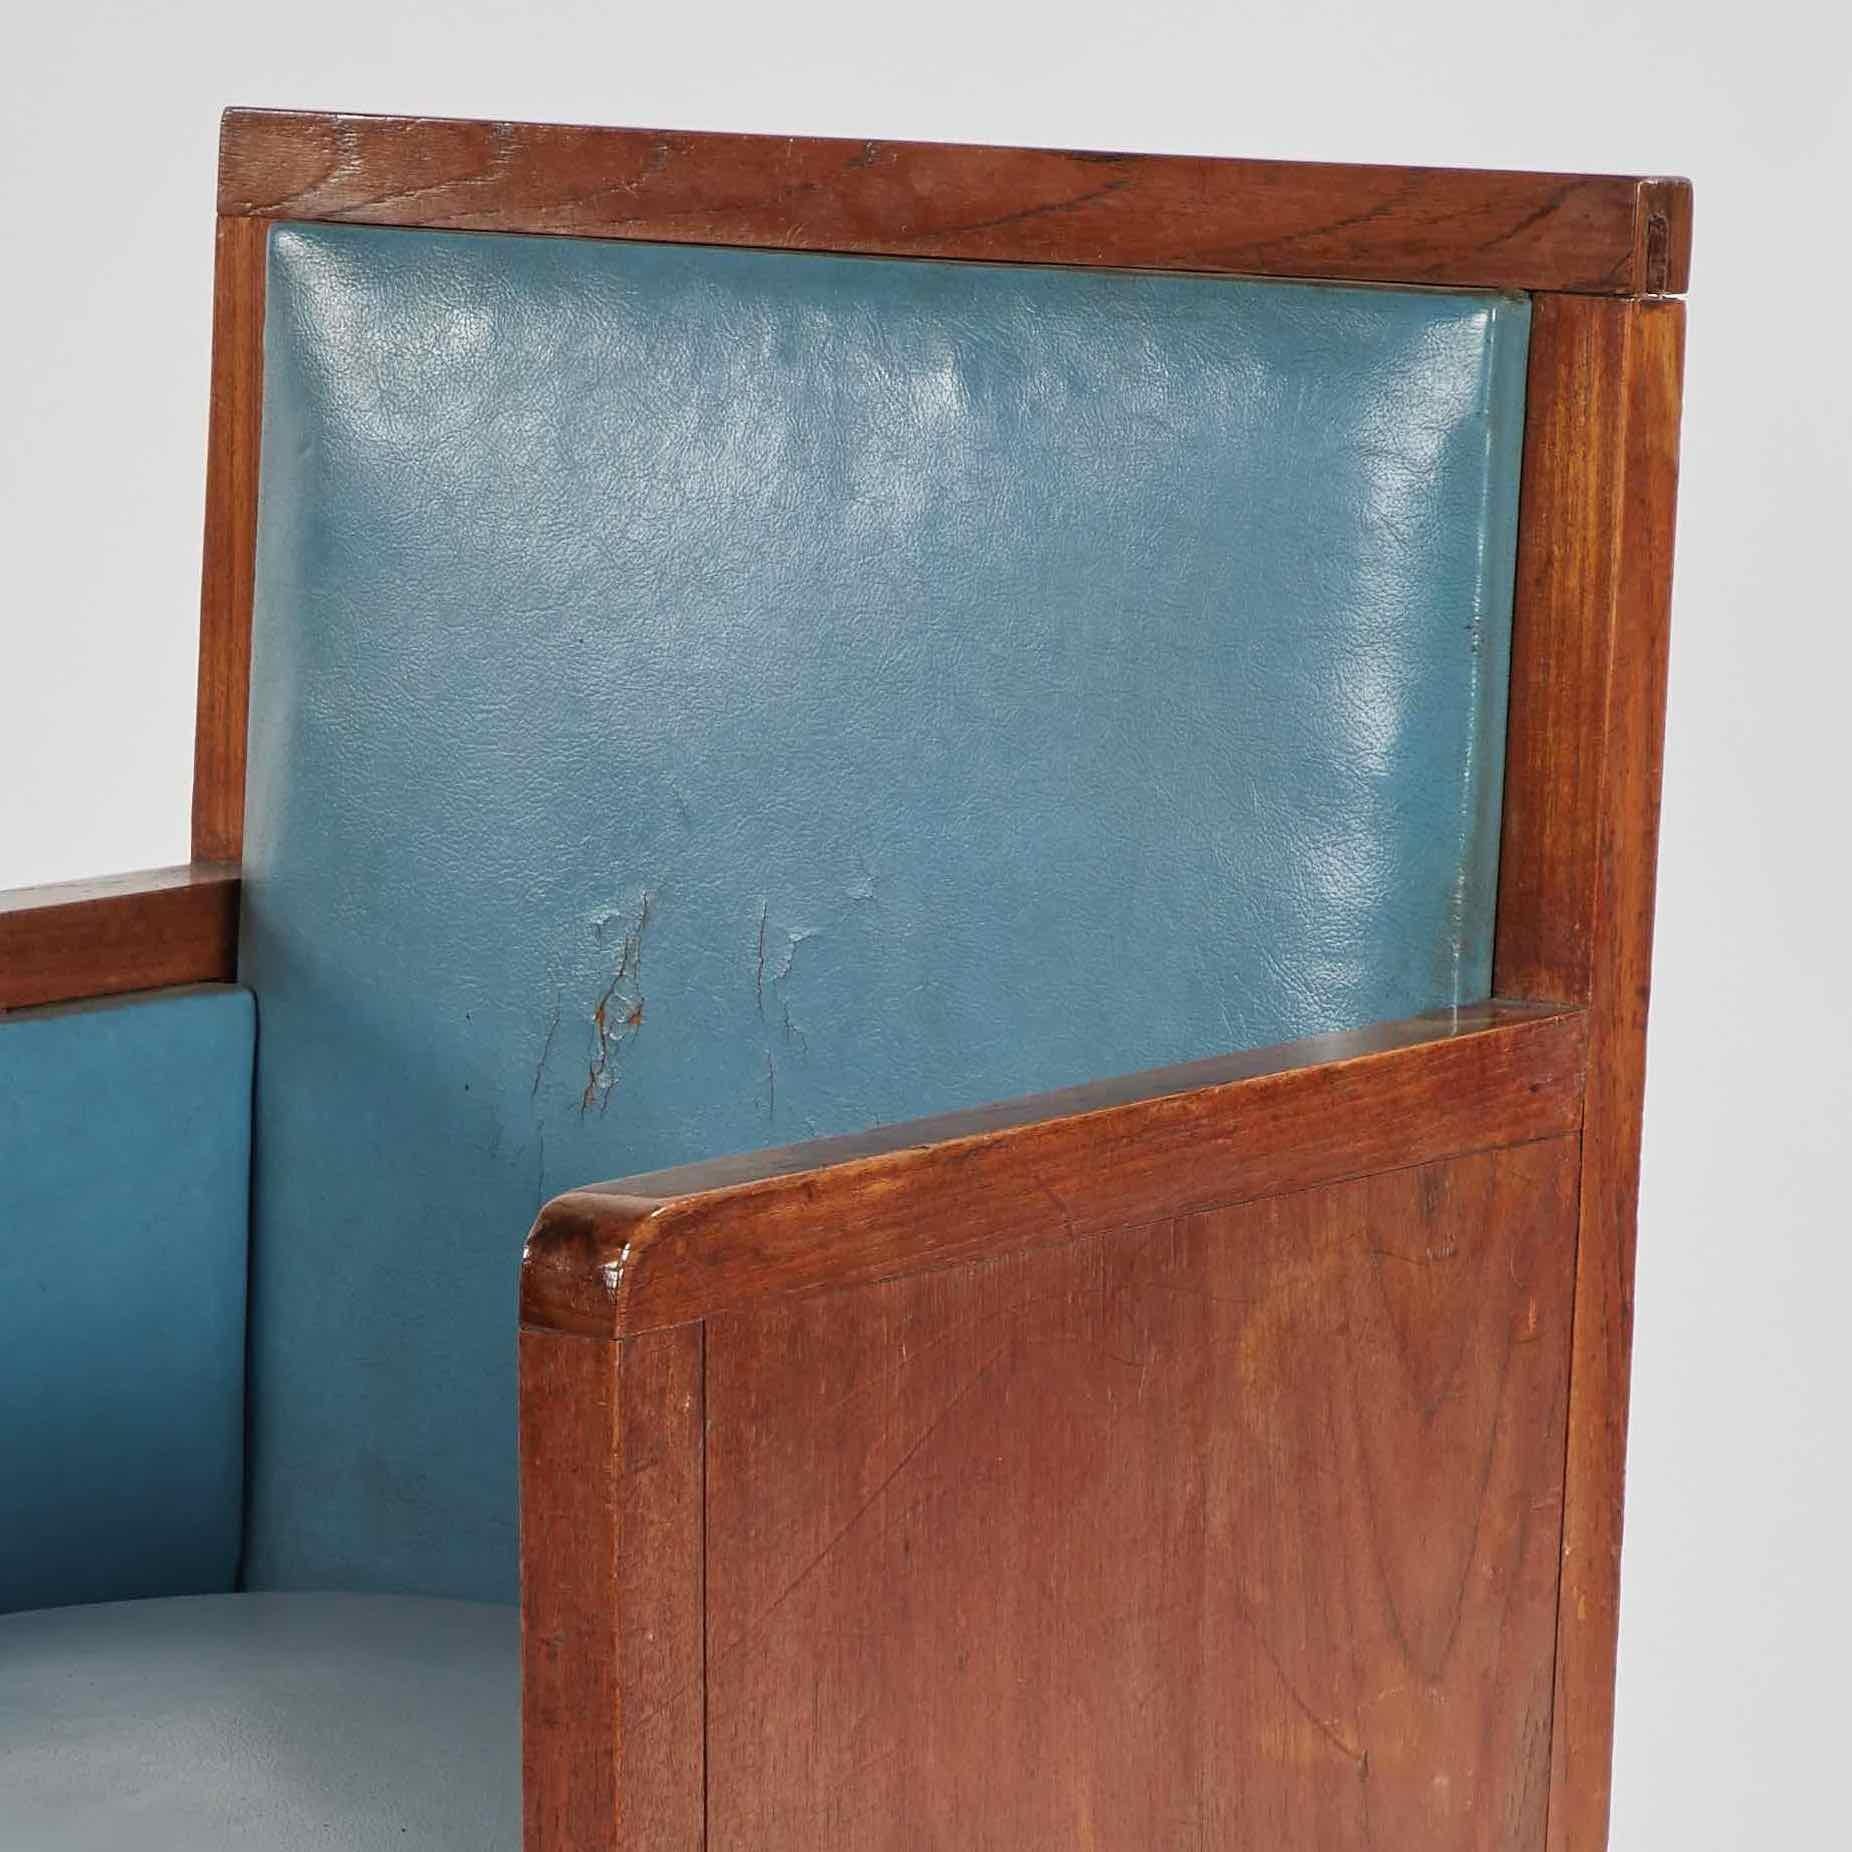 Art deco wooden armchair upholstered in blue leather from France. 